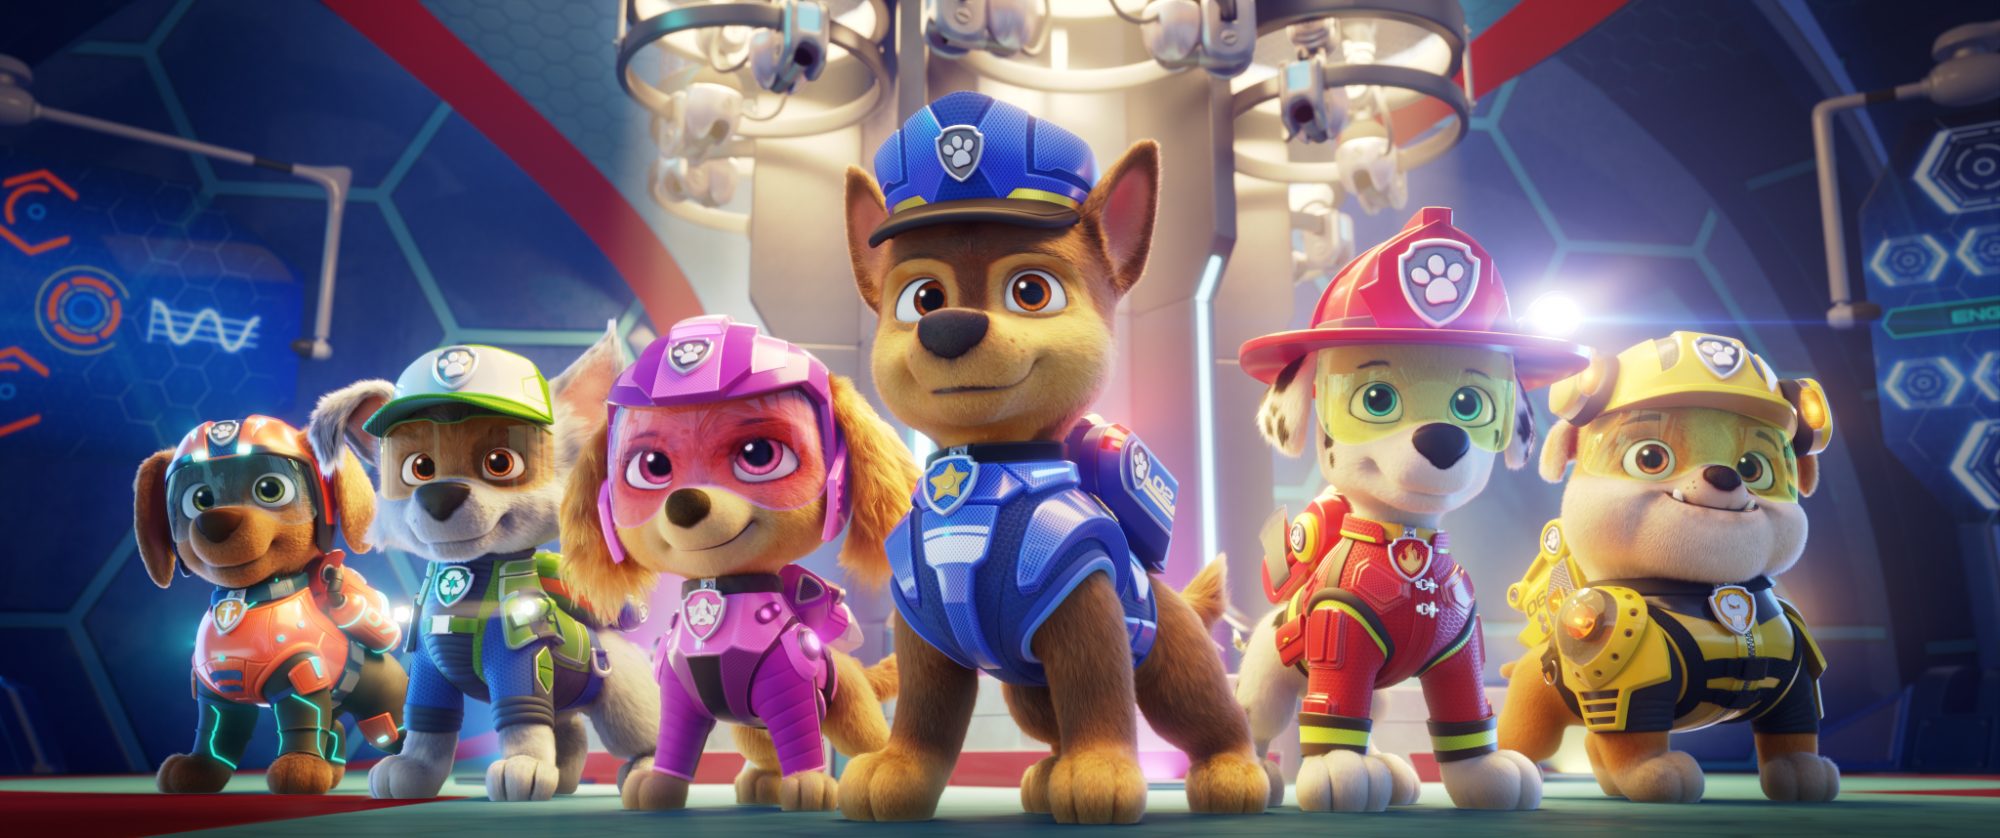 NickALive!: New 'PAW Patrol: The Movie' Character Posters Feature Jimmy  Kimmel, Kim Kardashian West, Randall Park, Tyler Perry, Yara Shahidi and  More